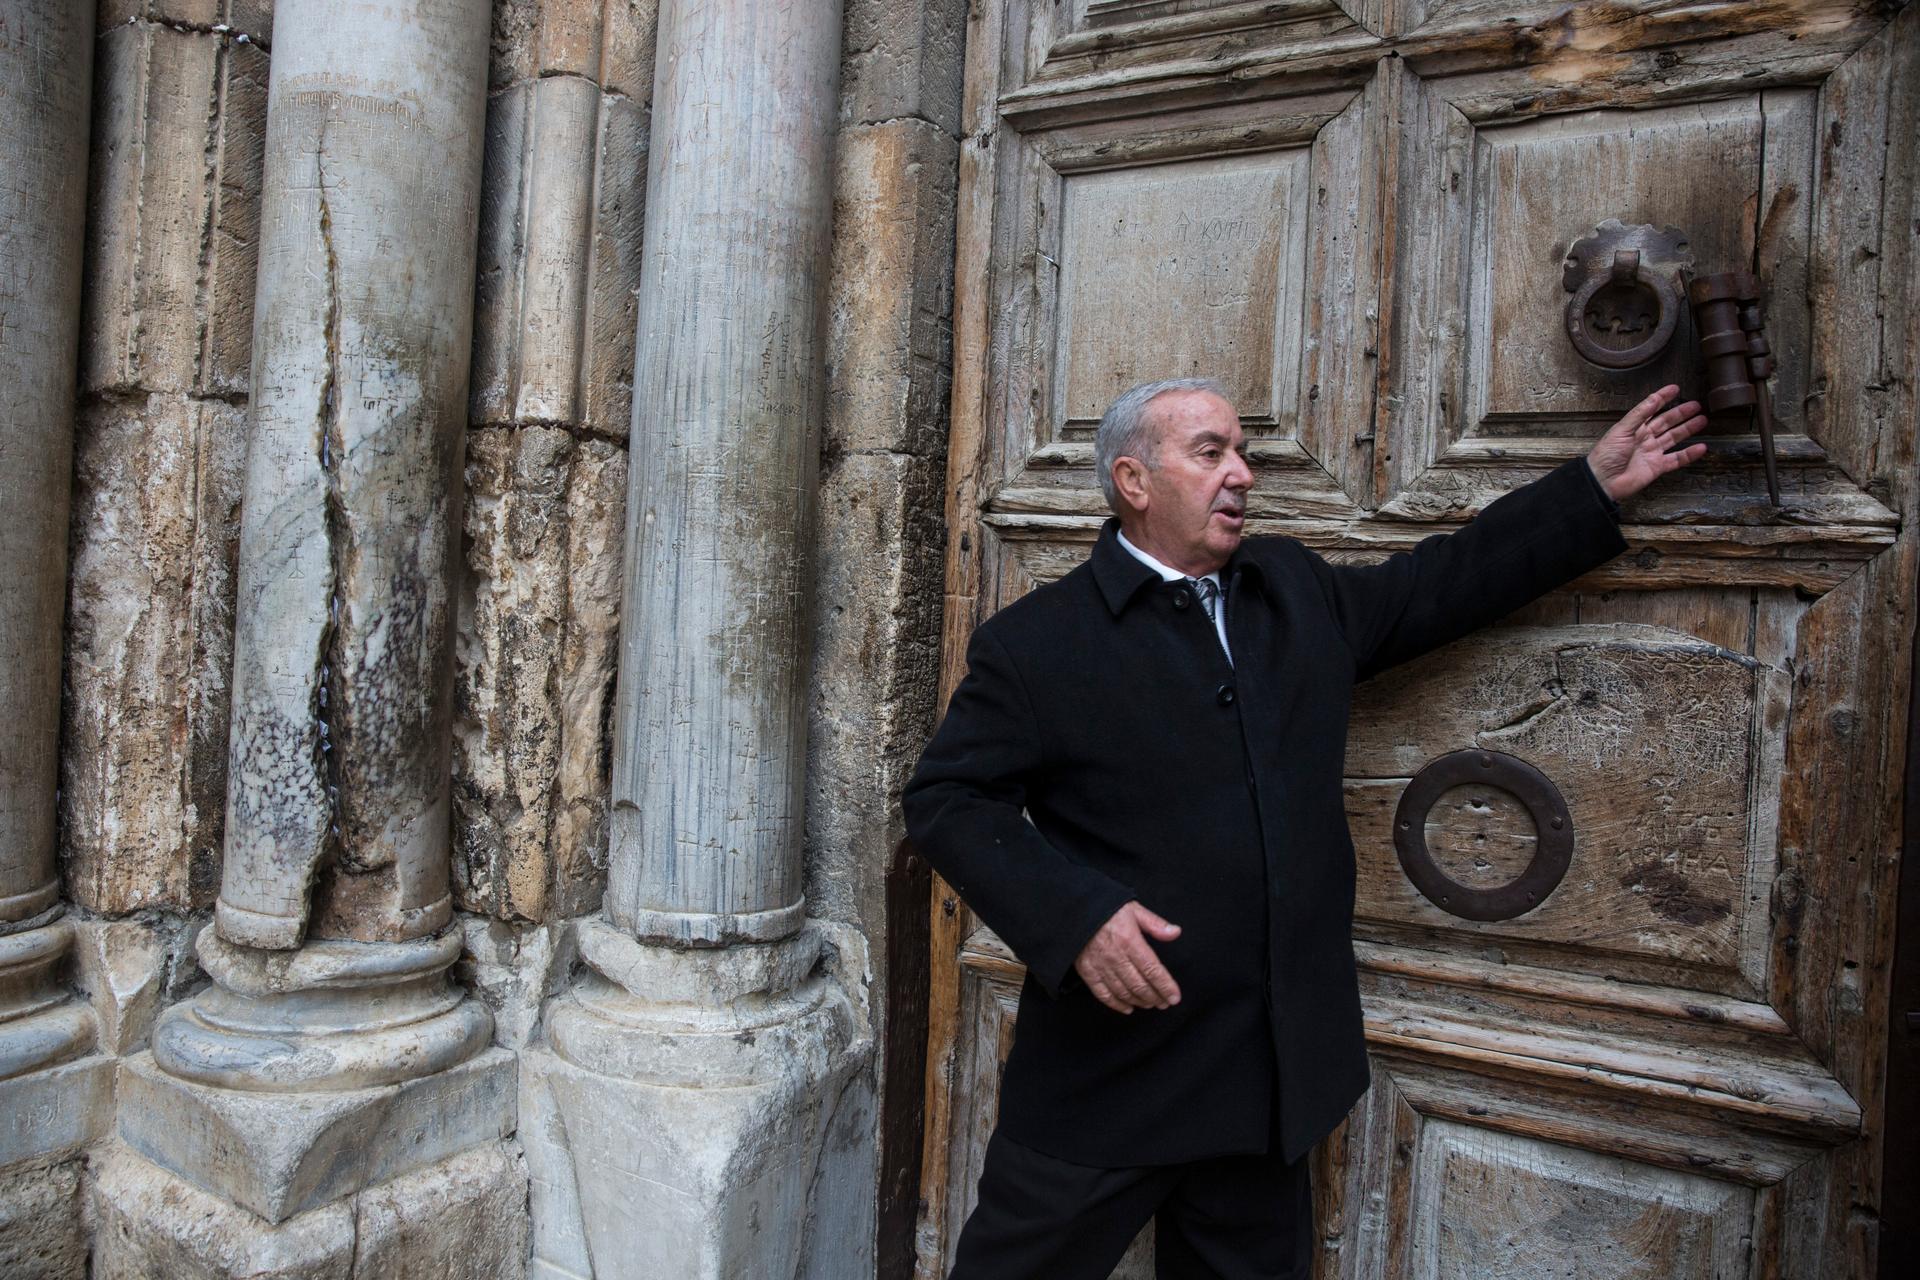 Mr. Wajeeh Nuseibeh outside one of the giant wooden doors of the Church of the Holy Sepulchre on Good Friday,